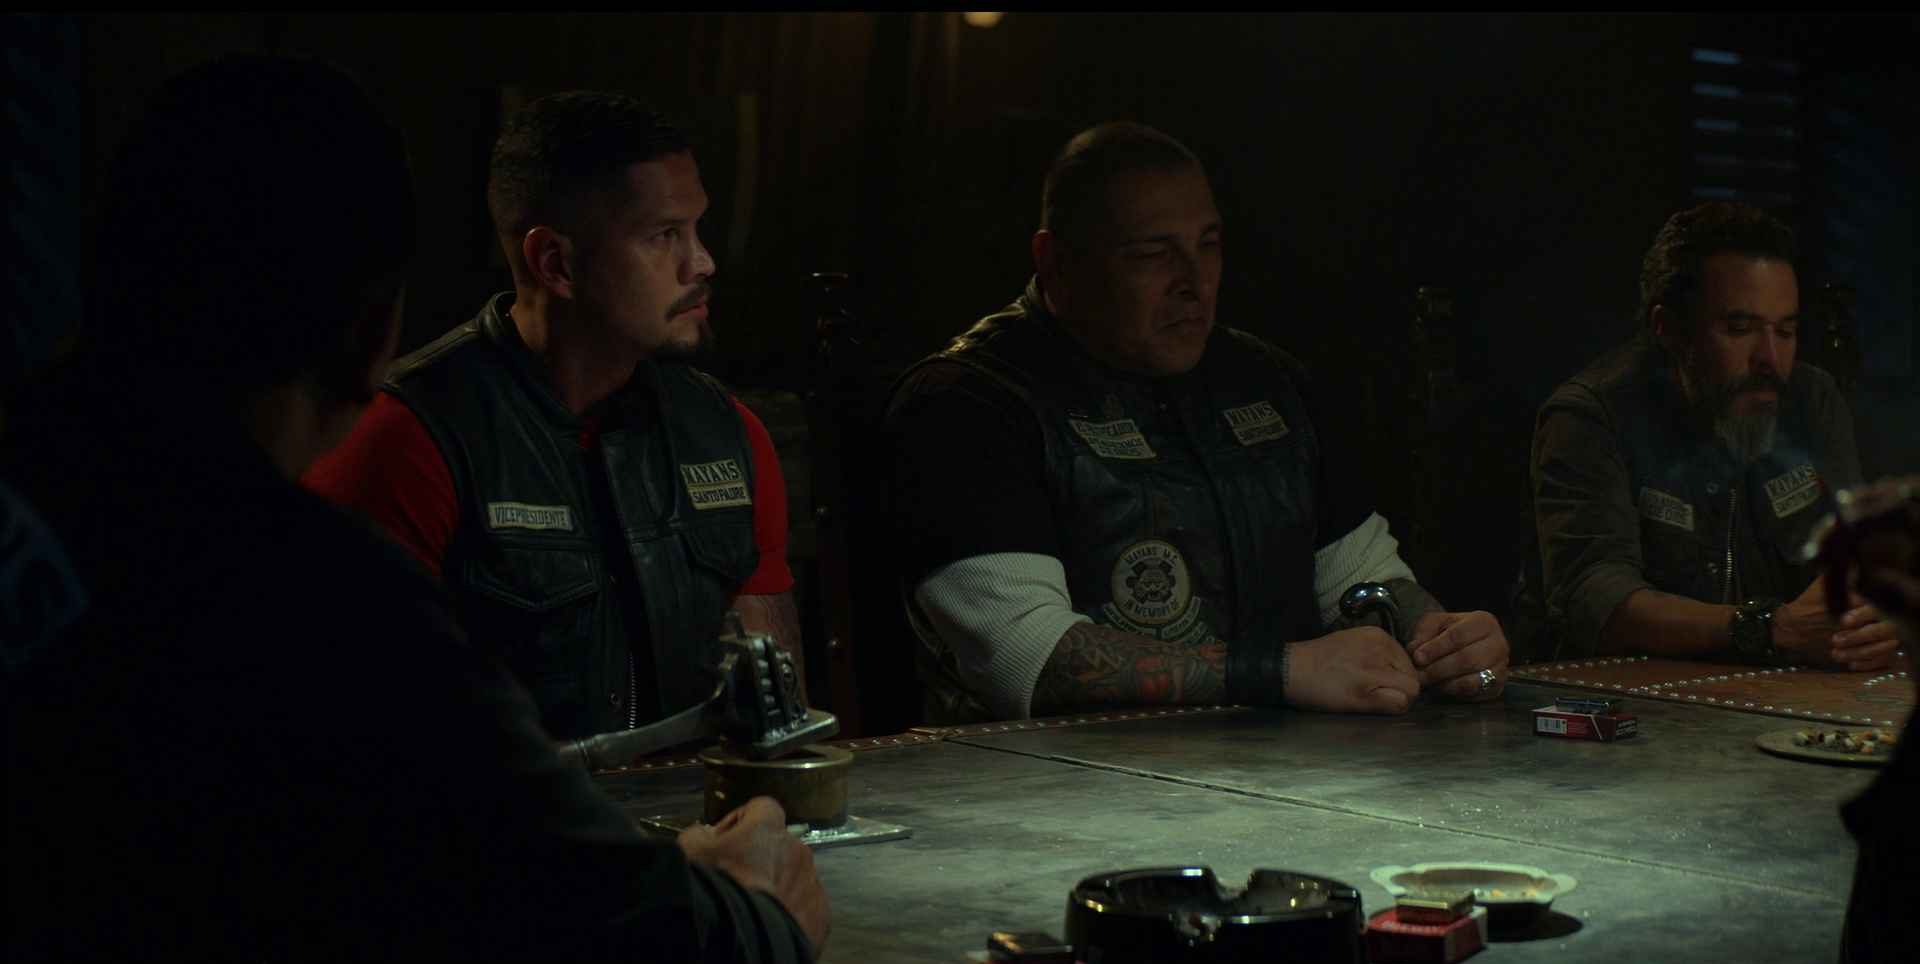 What To Expect From Mayans M.C. Season 4 Episode 11?